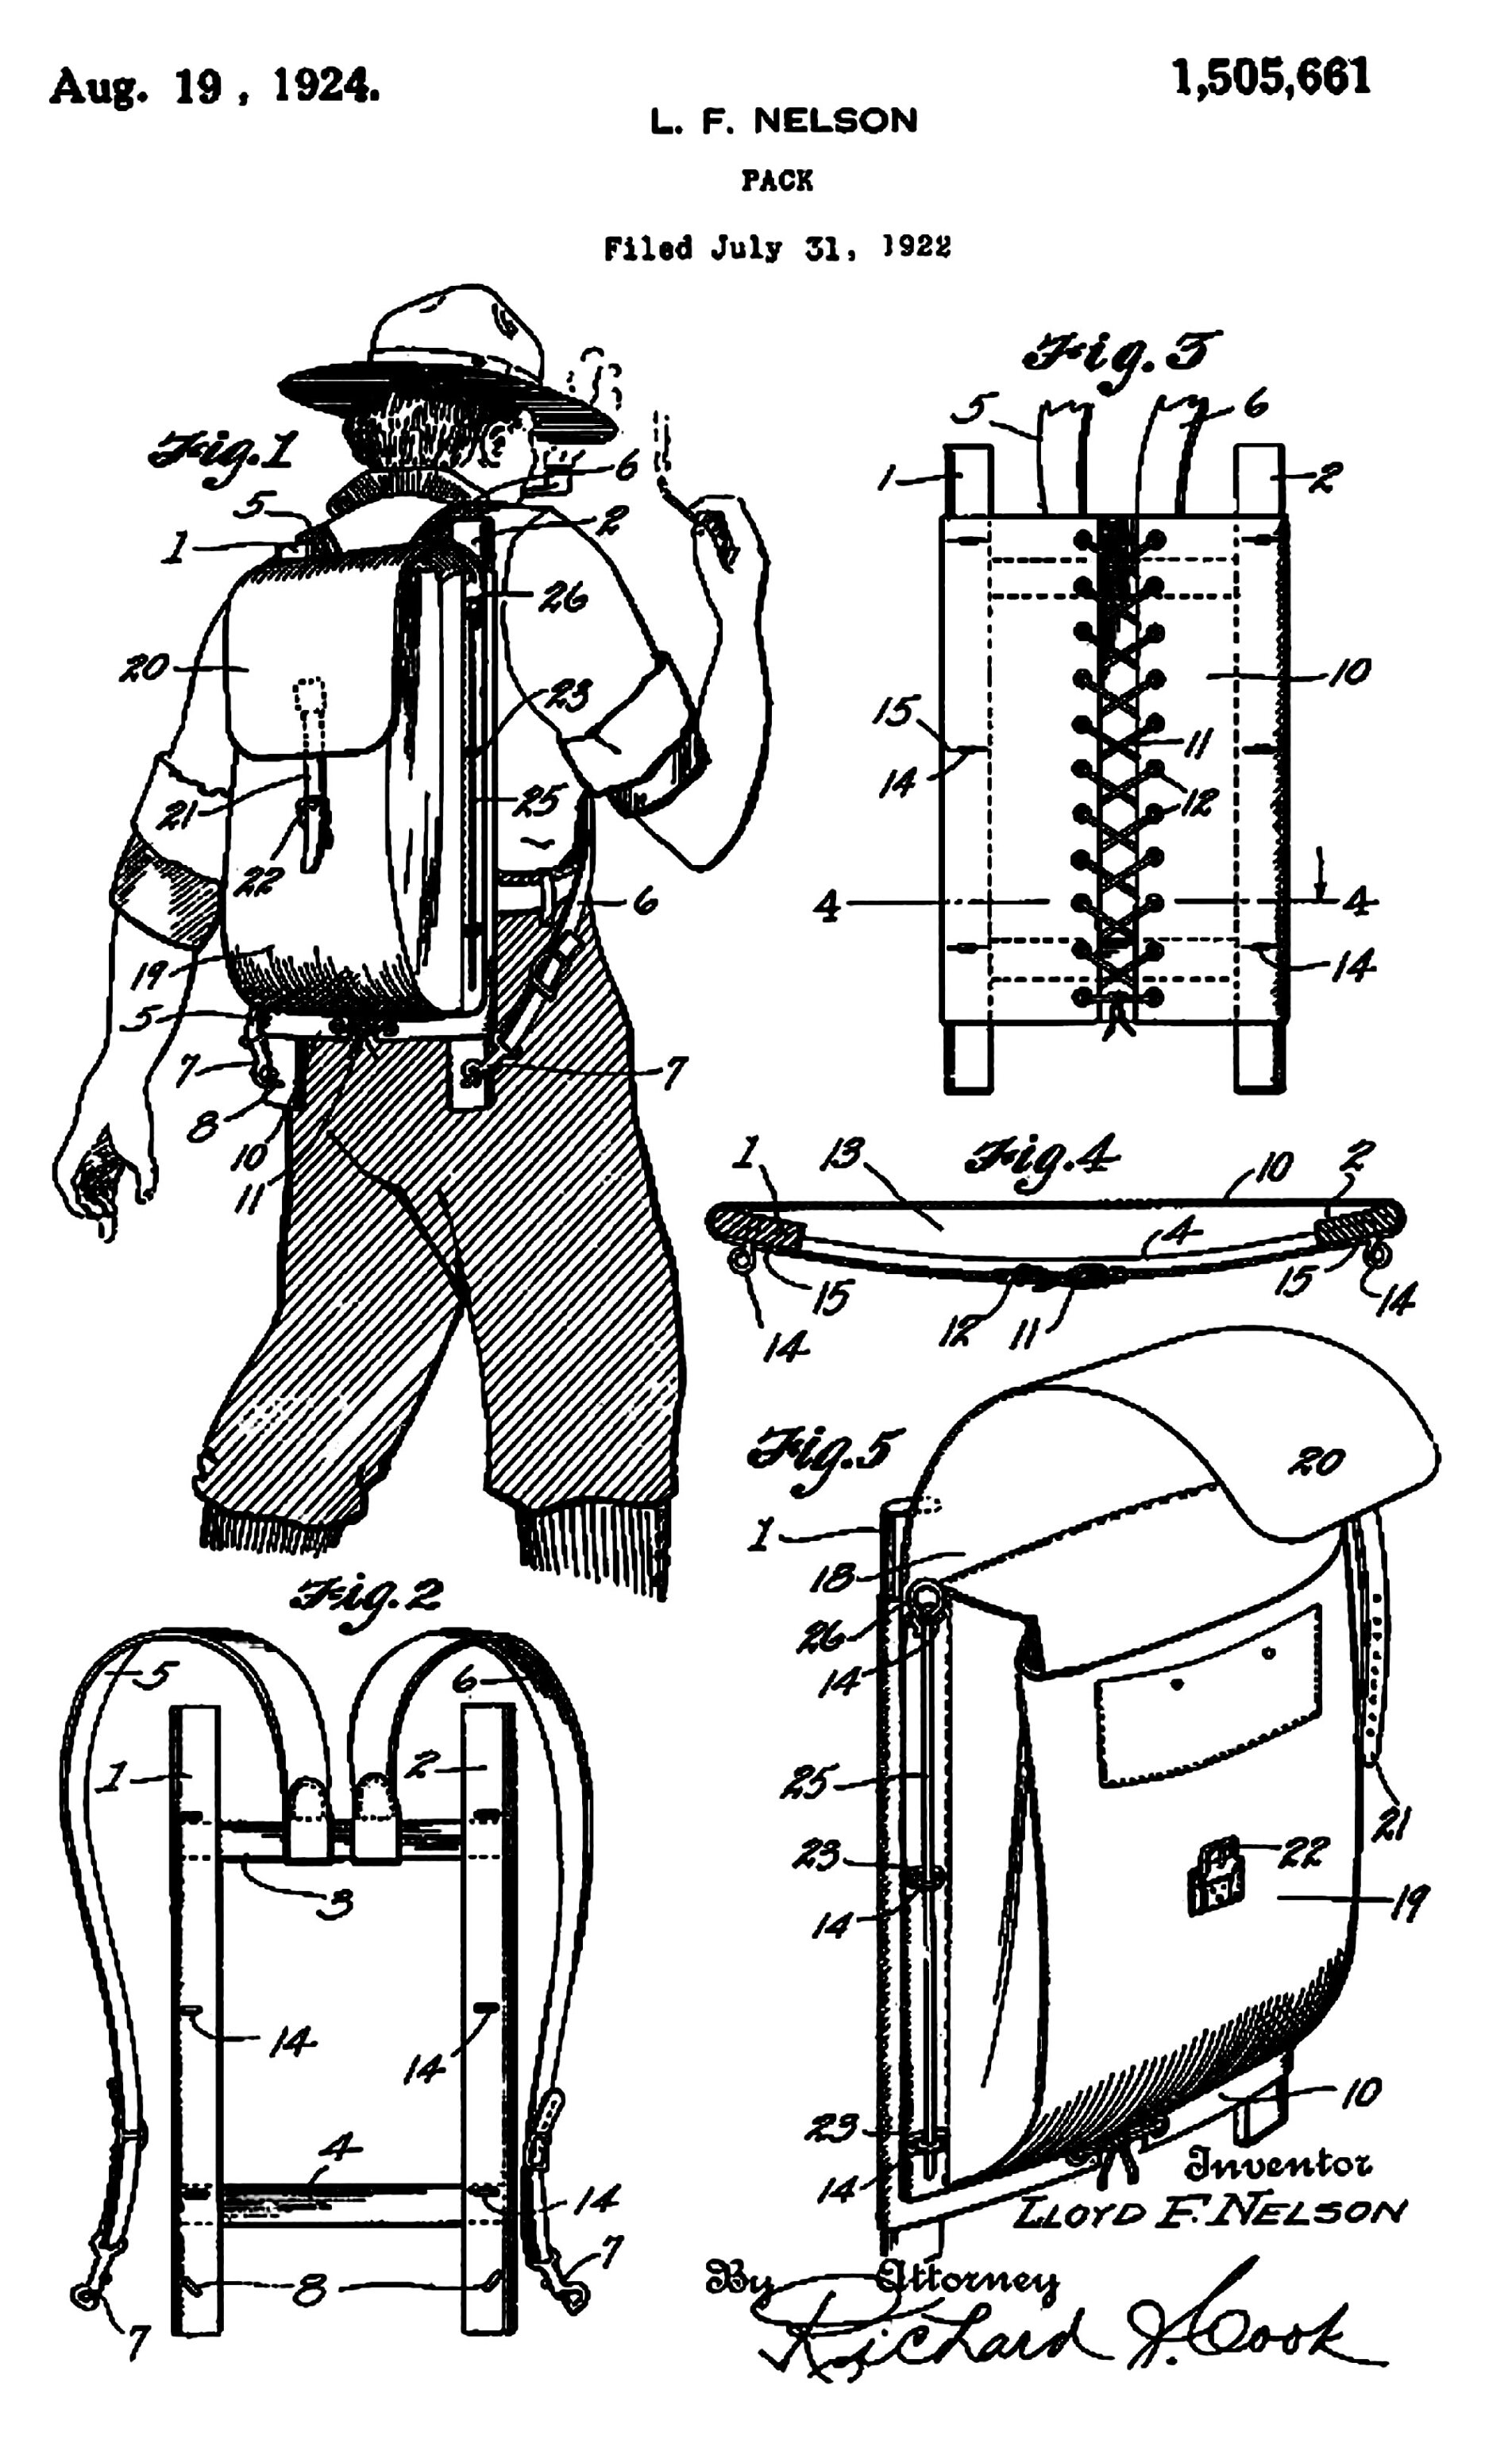 Lloyd F. Nelson patent drawing for Trapper Nelson pack.